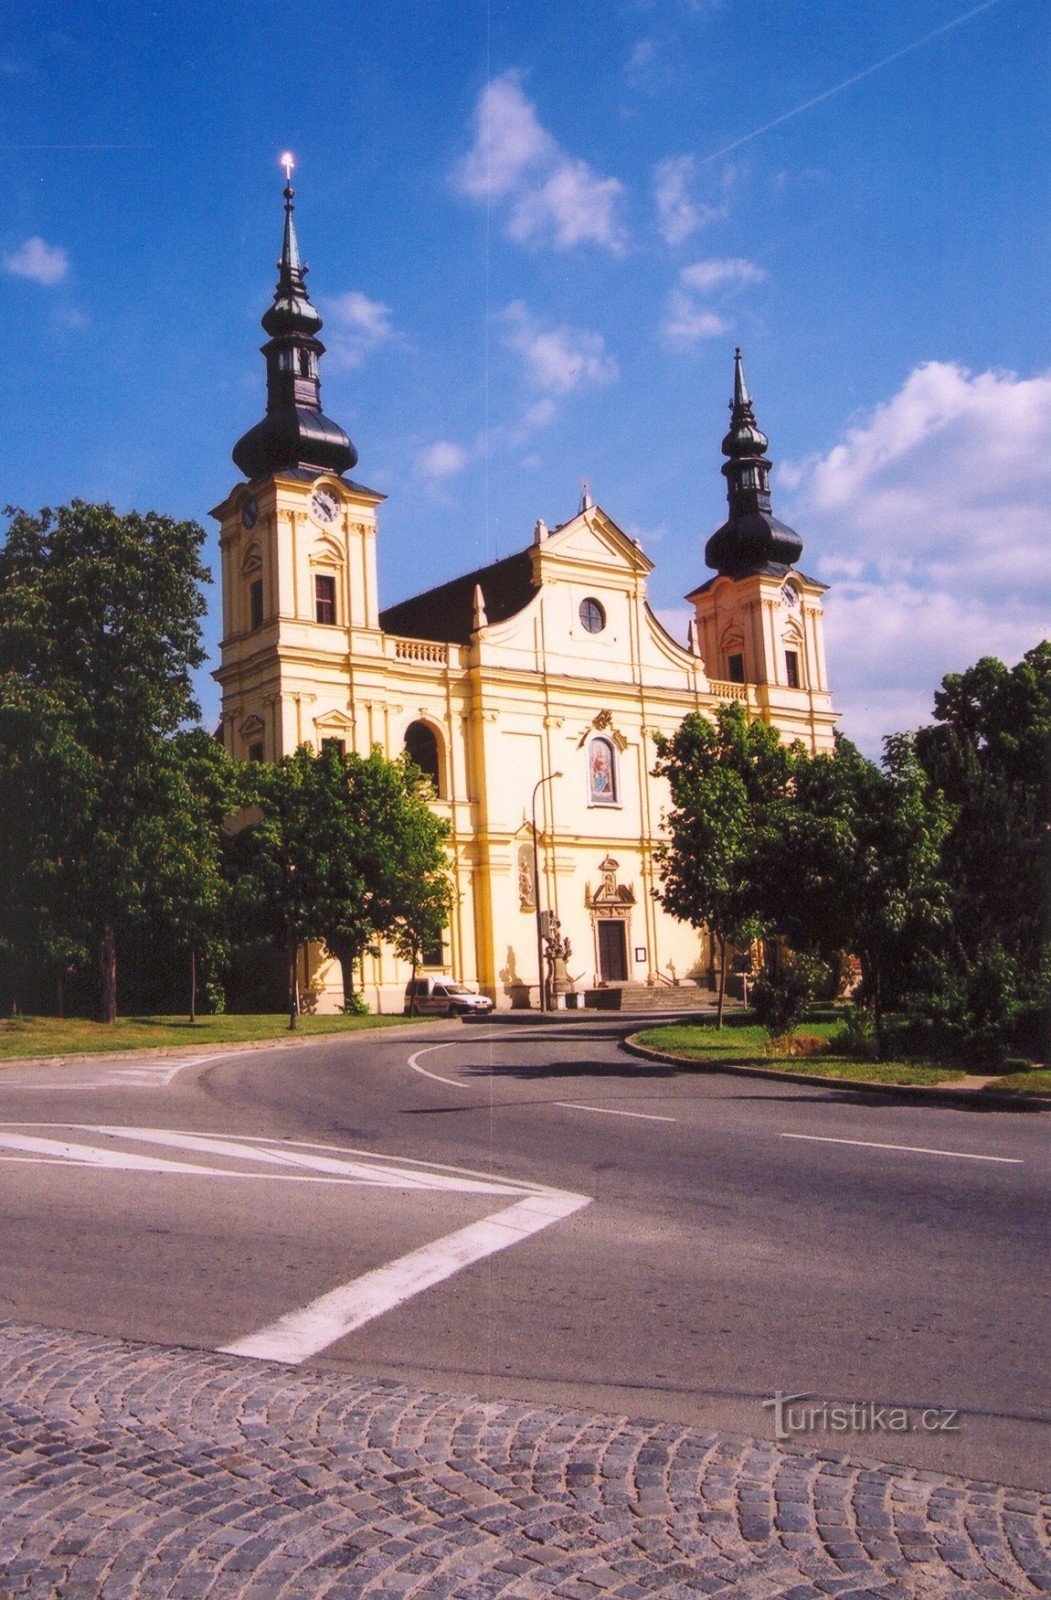 Brno-Tuřany - Church of the Annunciation of the Virgin Mary